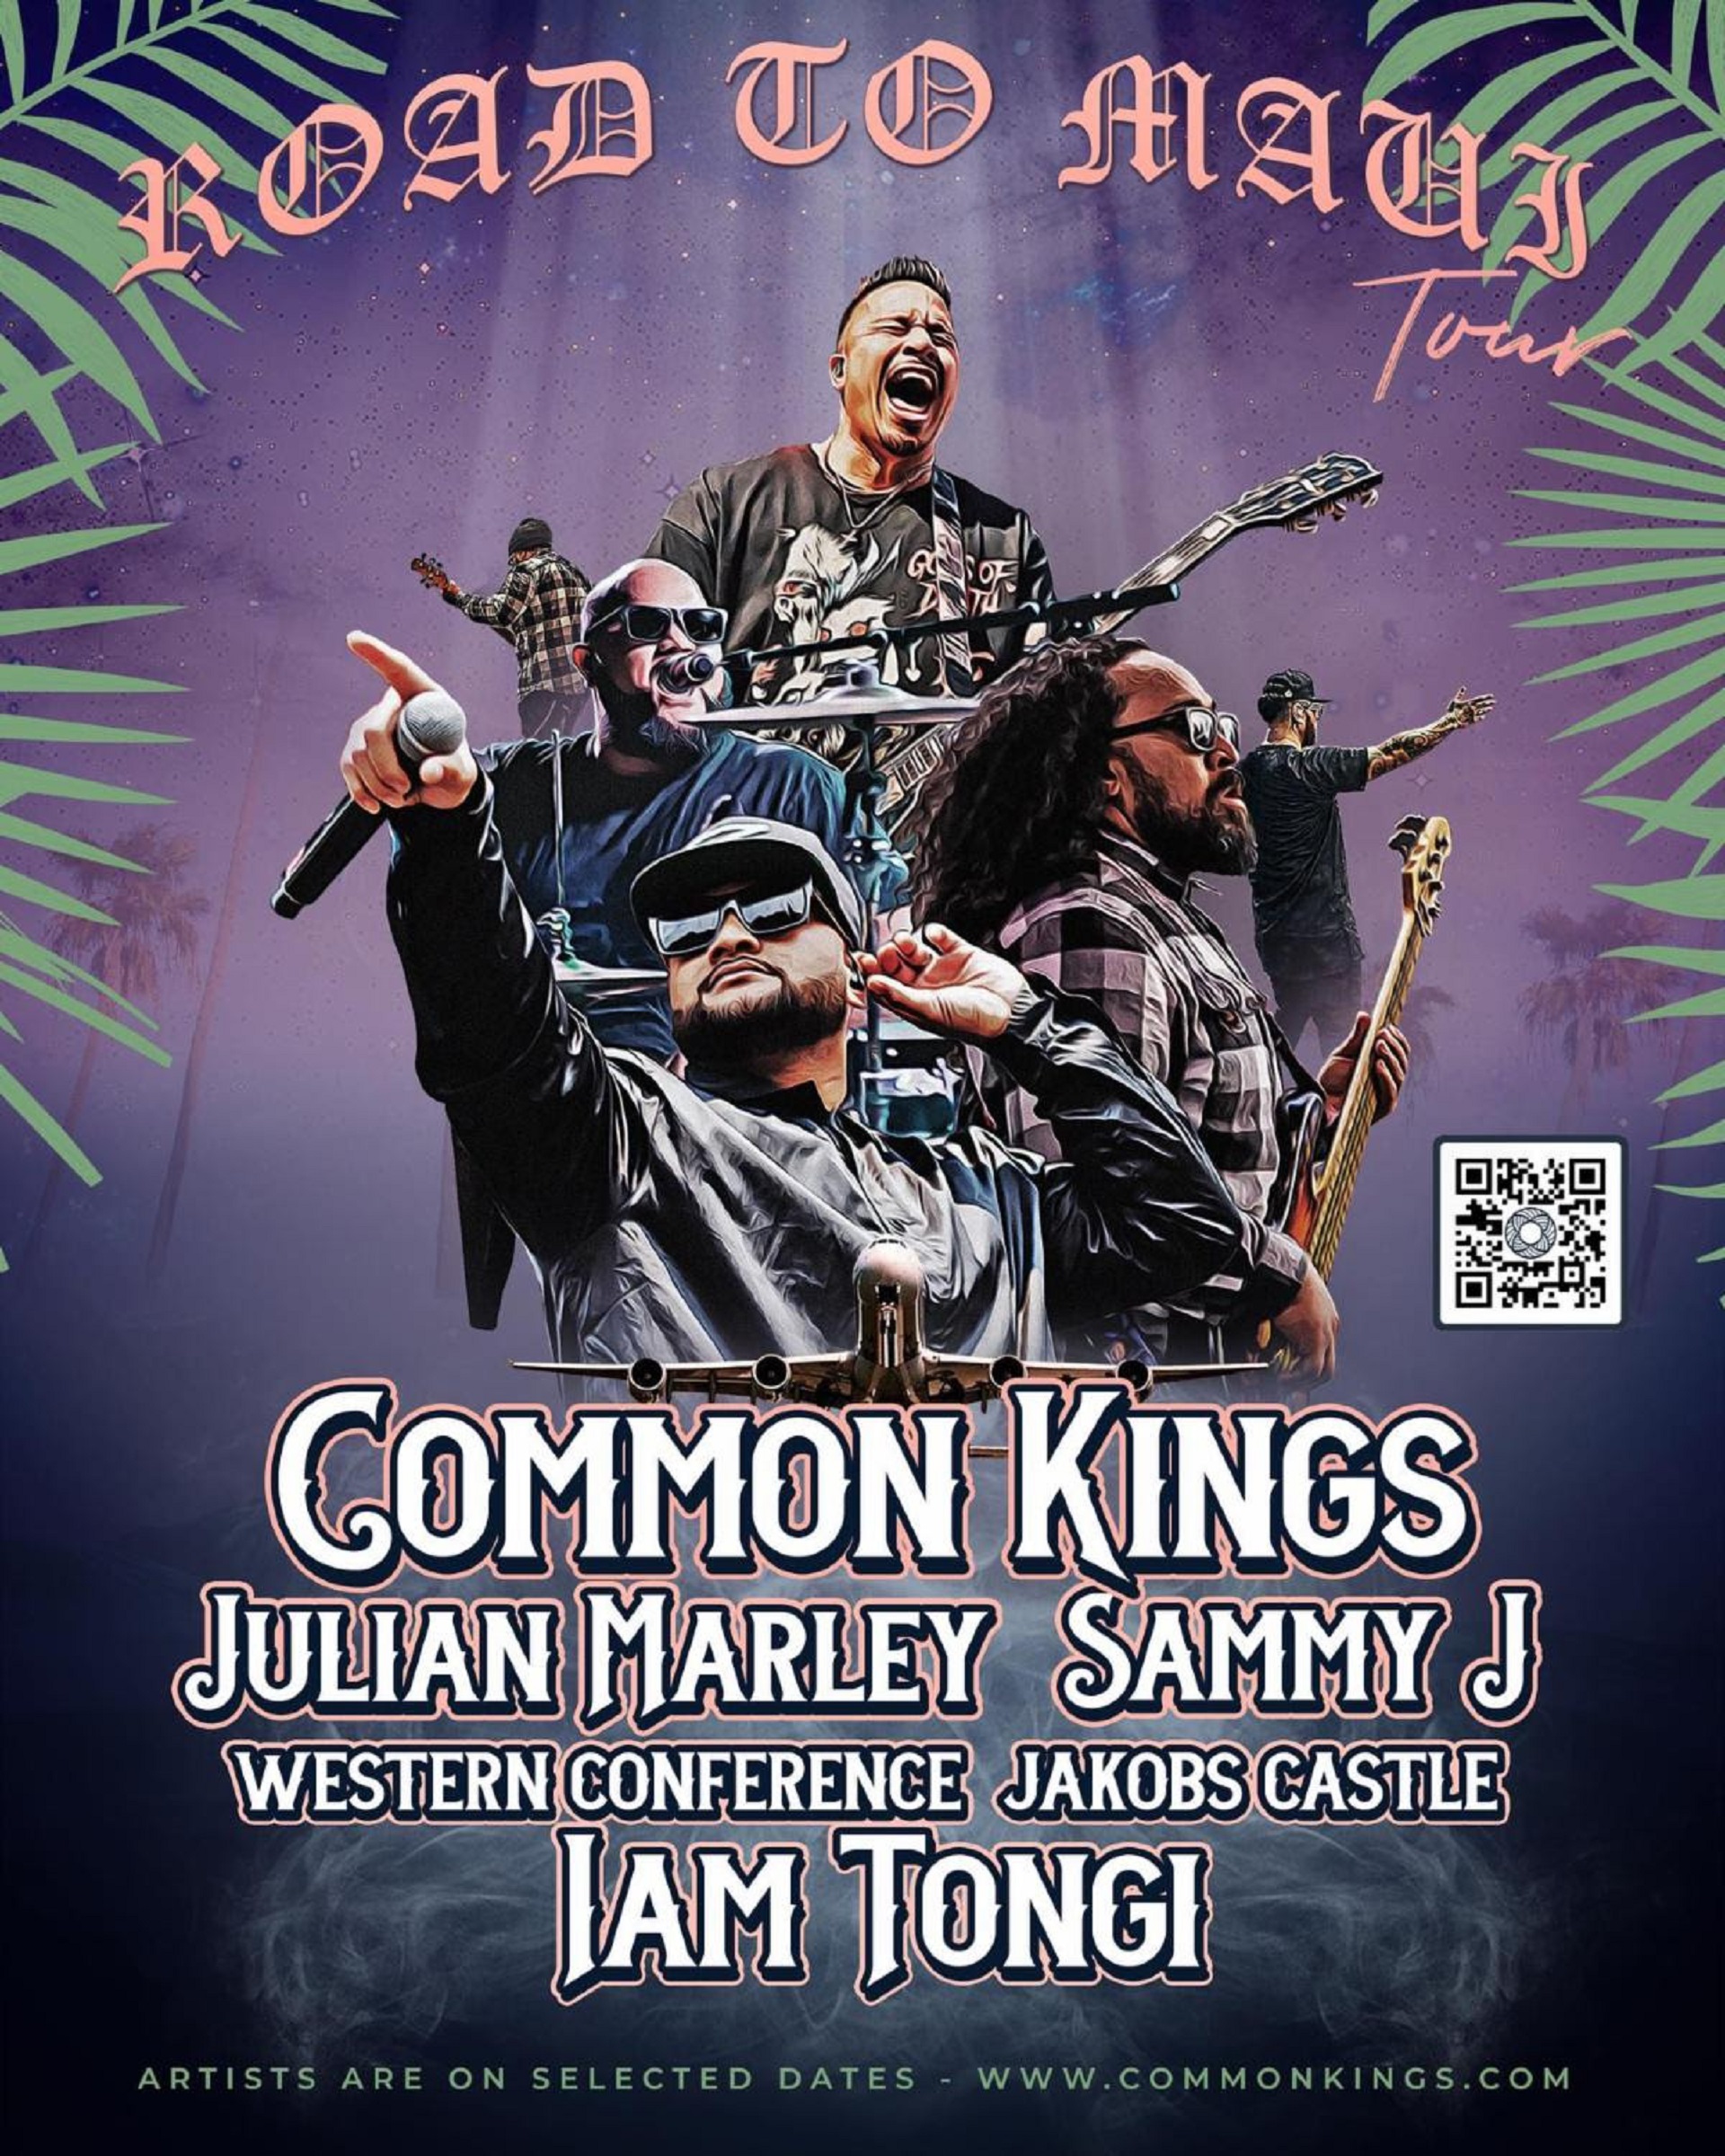 Common Kings Announces Fall Tour Renamed to “Road to Maui Tour” Plus Julian Marley and Sammy Johnson to Join for Select Dates